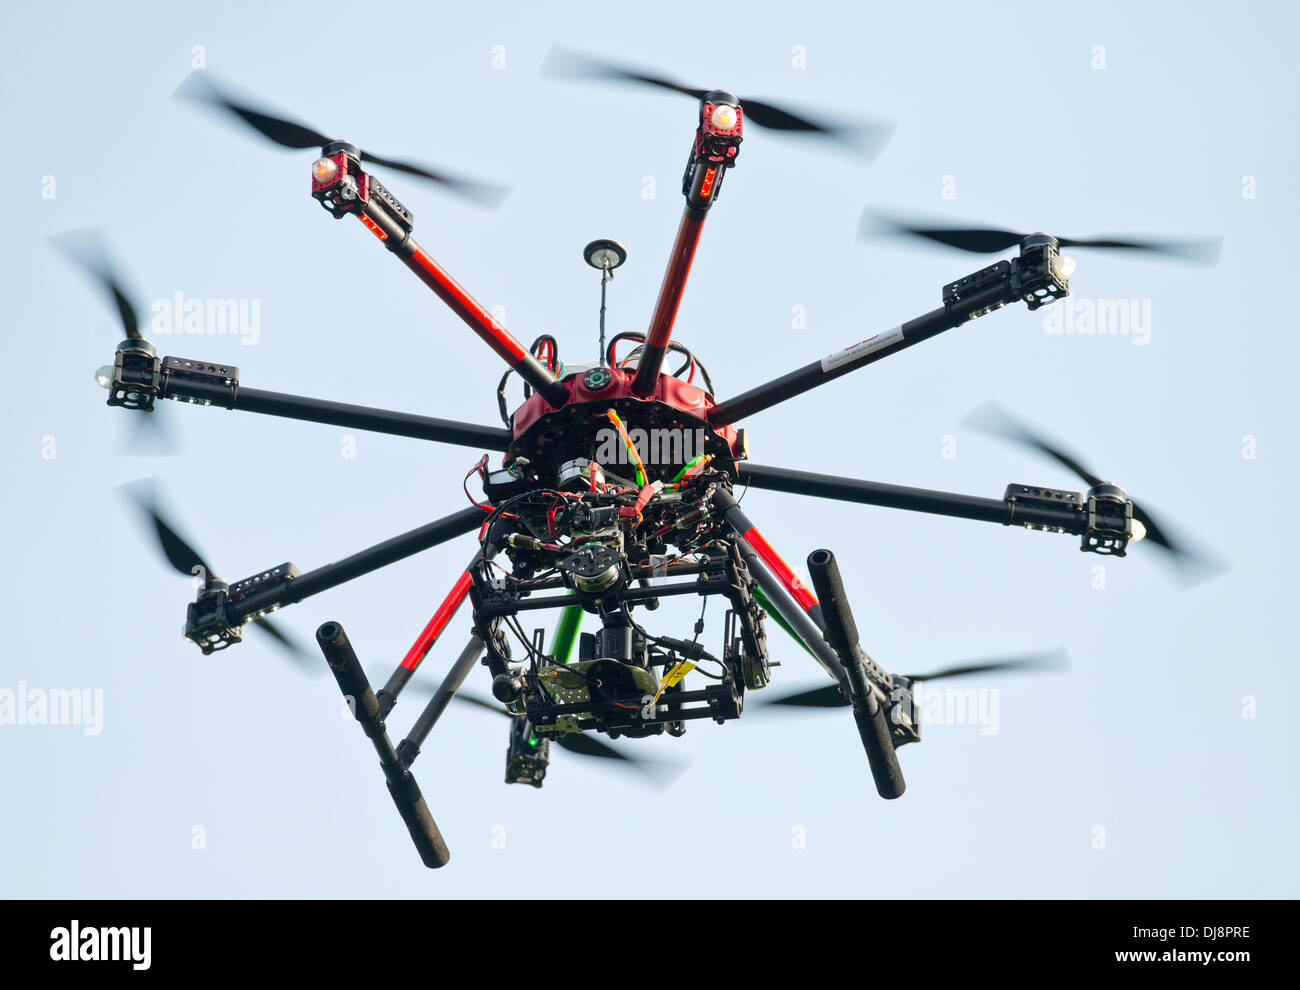 Fuerstenwalde, Germany. 12th Nov, 2013. A camera drone is pictured at the sky in Fuerstenwalde, Germany, 12 November 2013. Photo: Patrick Pleul/dpa/Alamy Live News Stock Photo